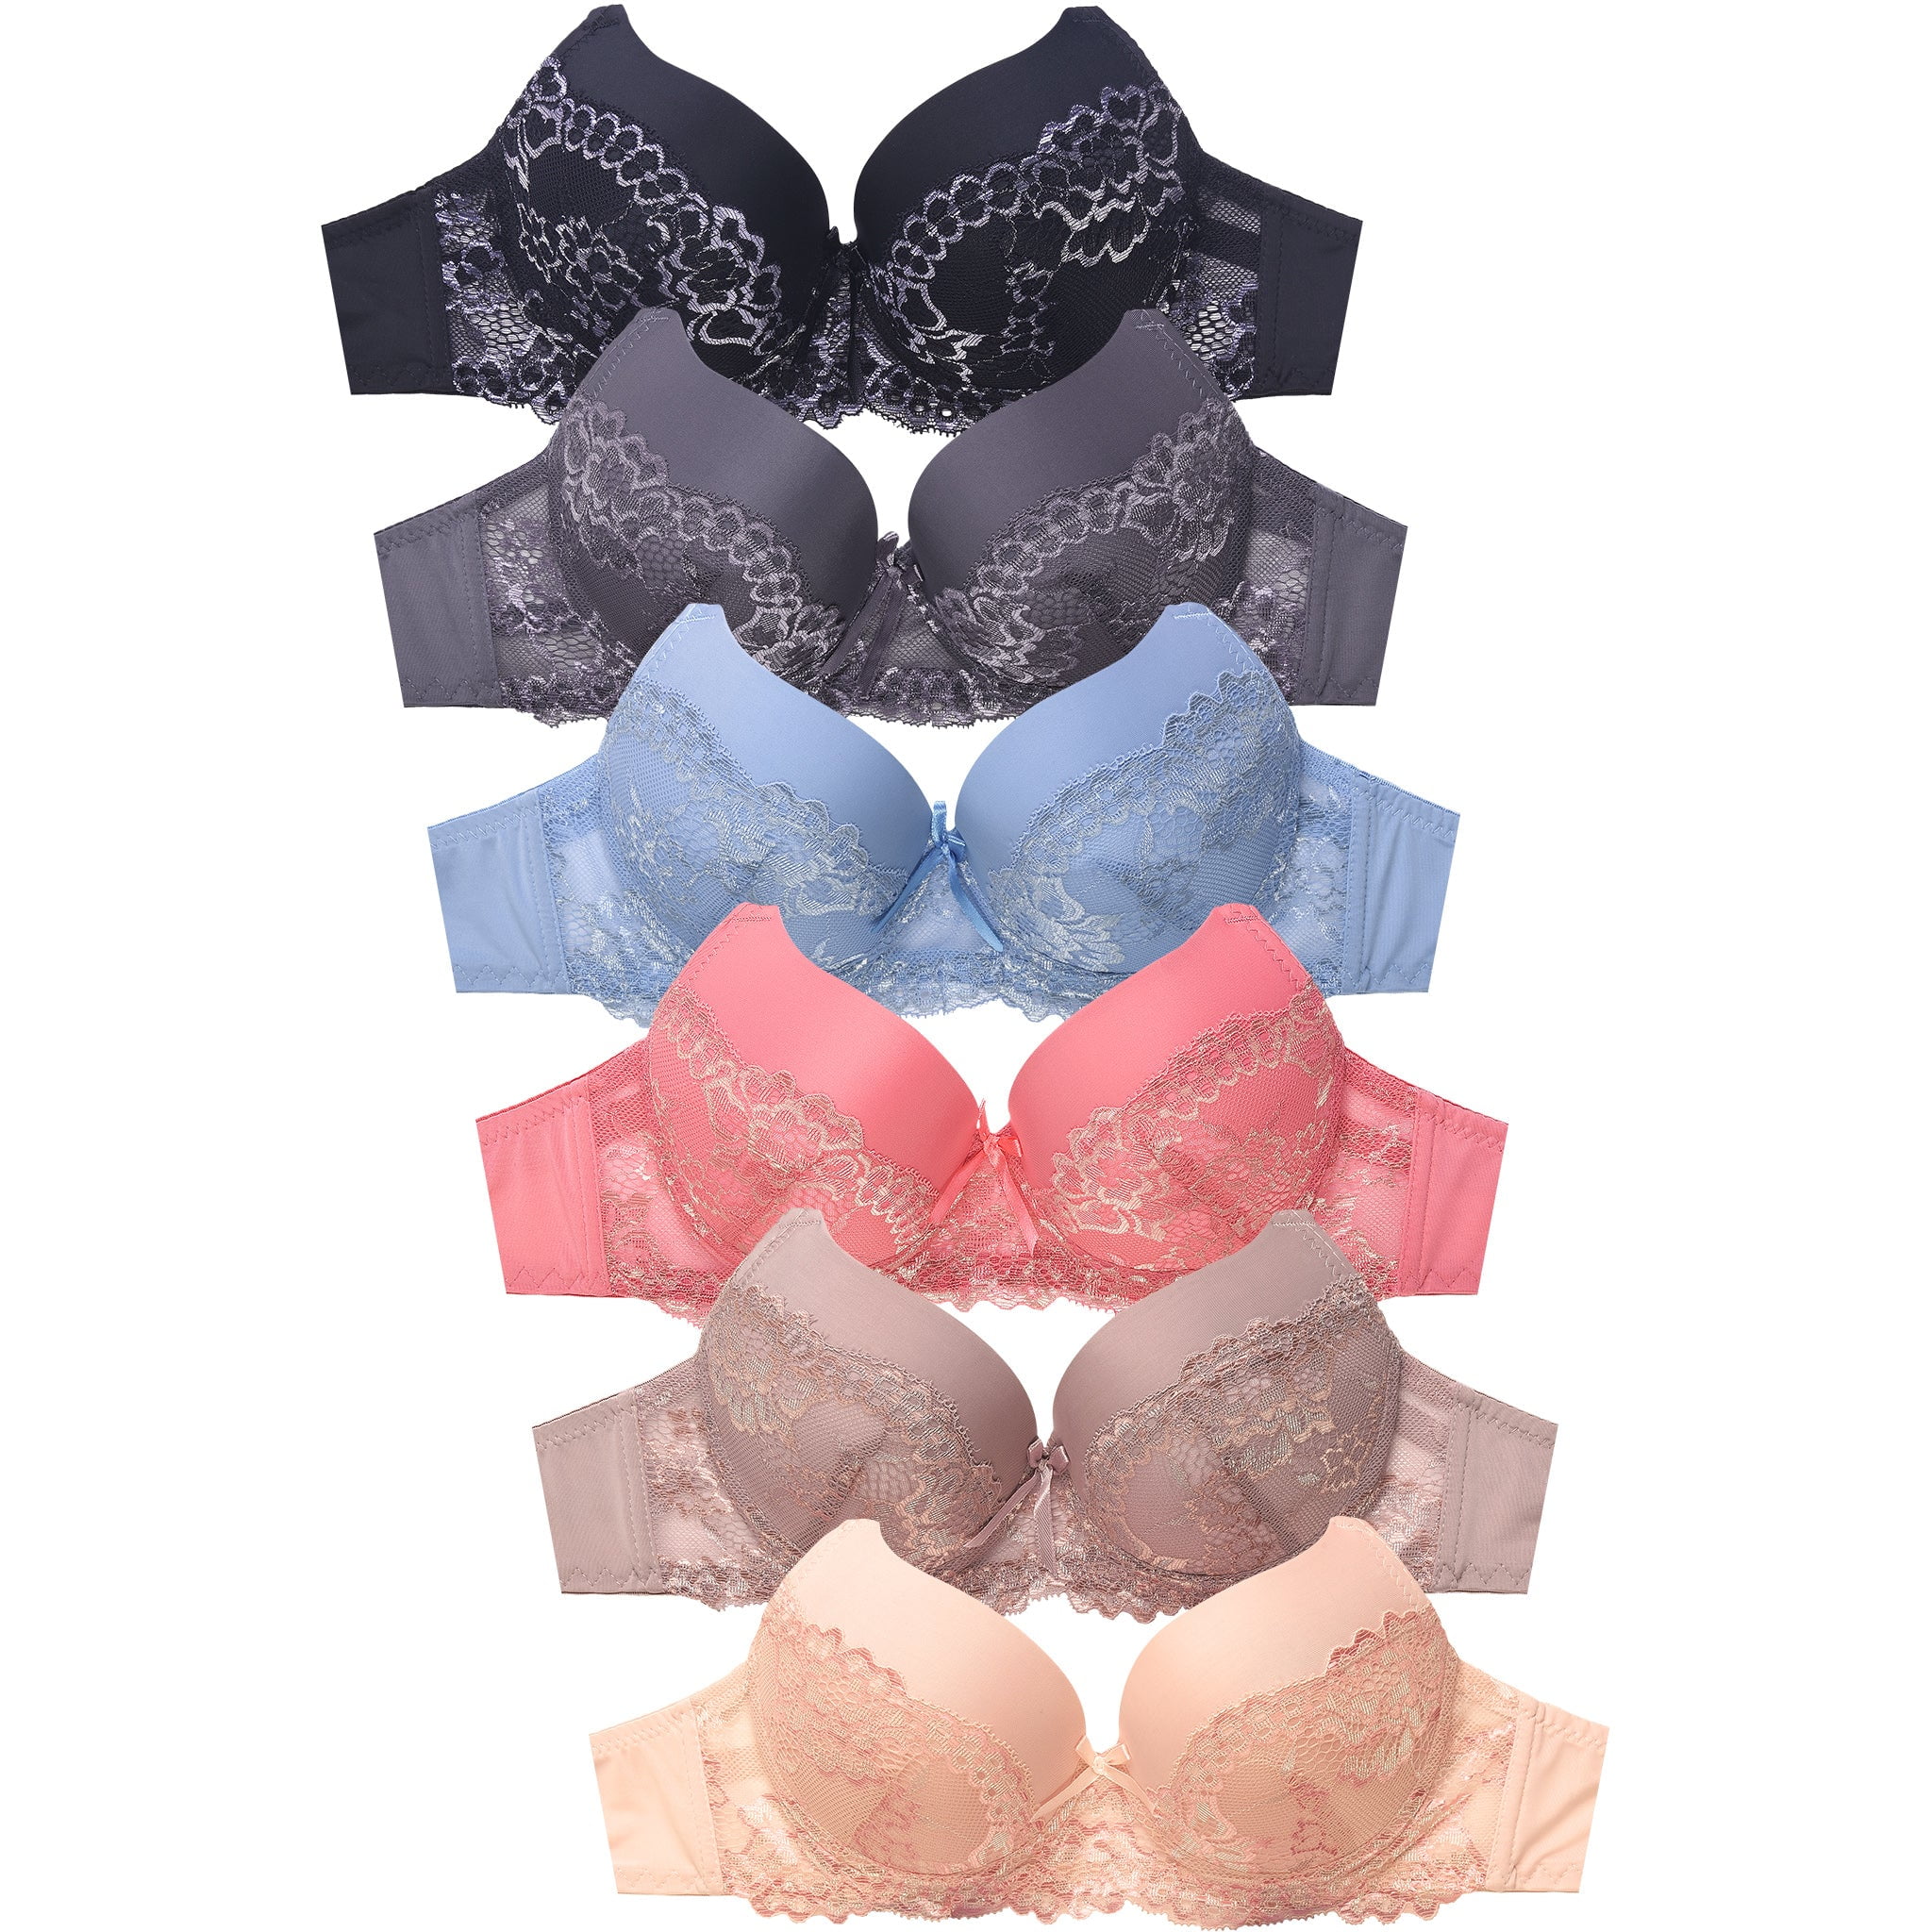 Mamia & Sofra IN-BR4430ND-40D D Cup Full Coverage Bra - Size 40 - Pack of 6